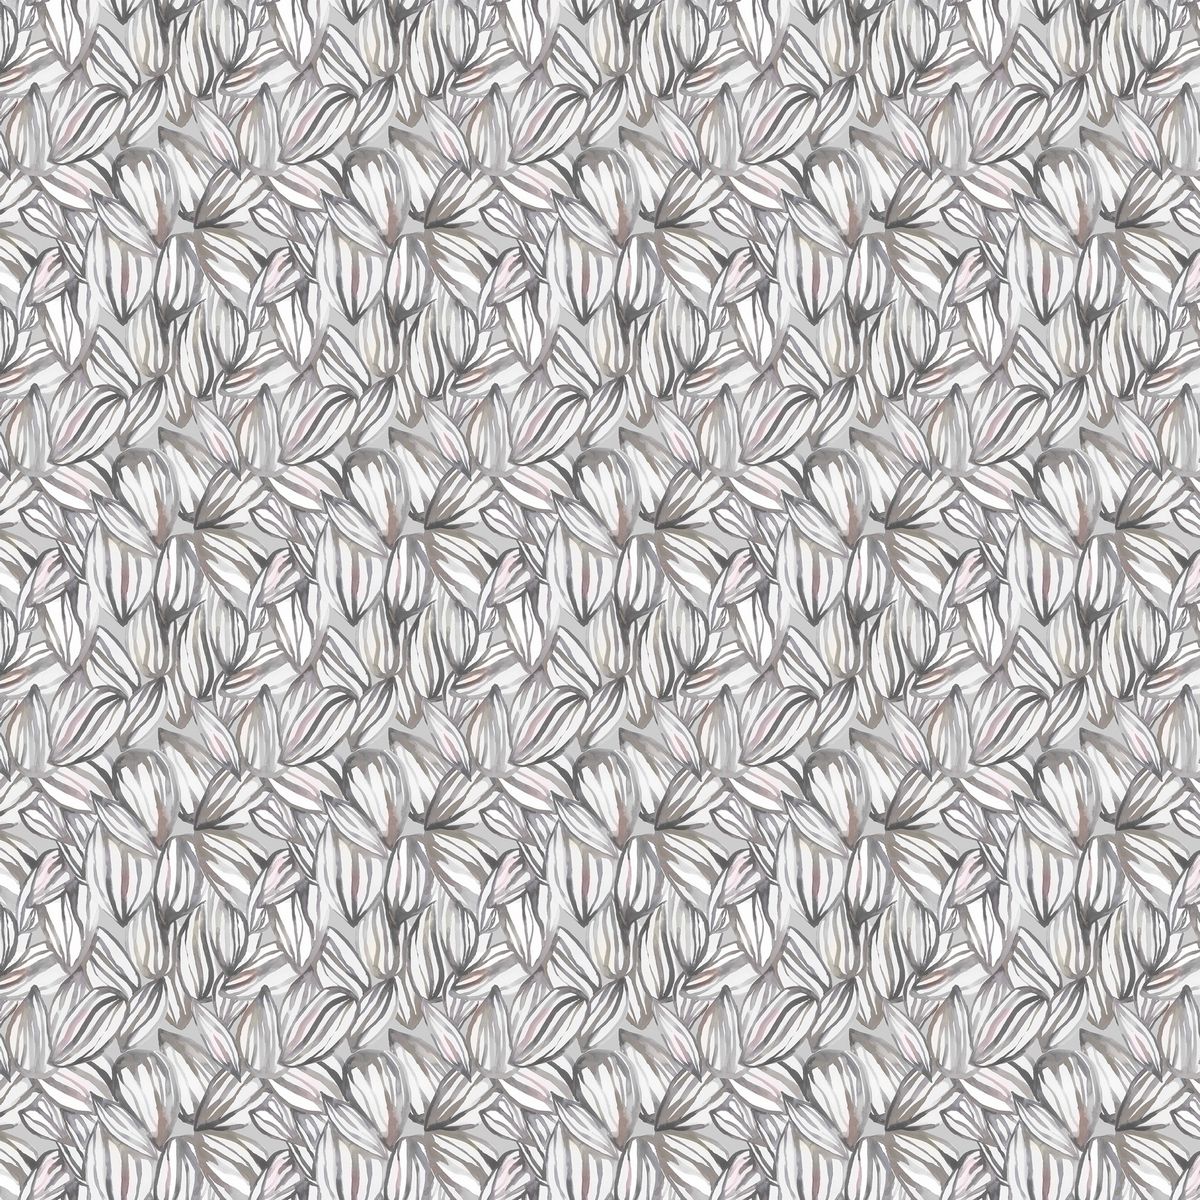 Topia Bamboo Fabric by Voyage Maison